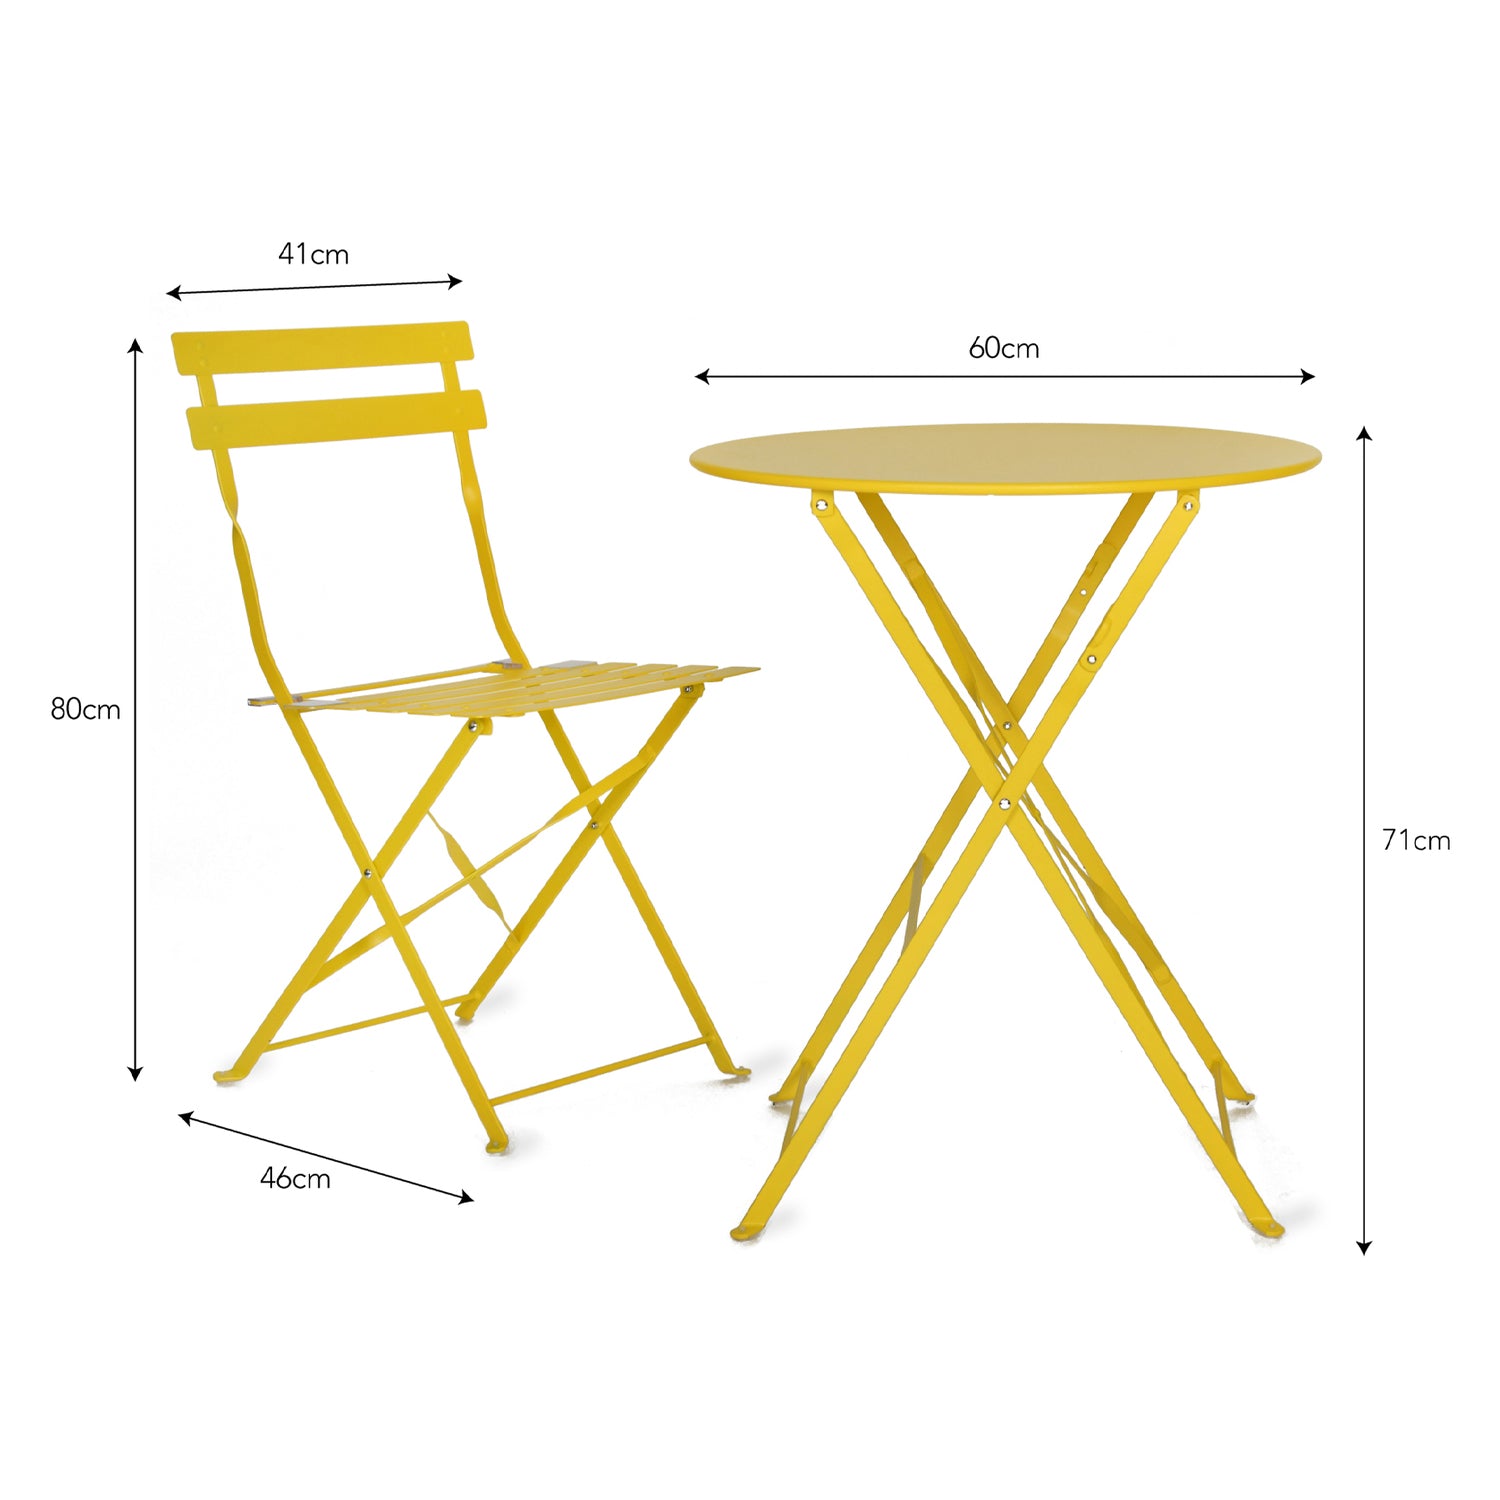 Rive Droite Bistro Outdoor Small Set in Lemon Steel by Garden Trading